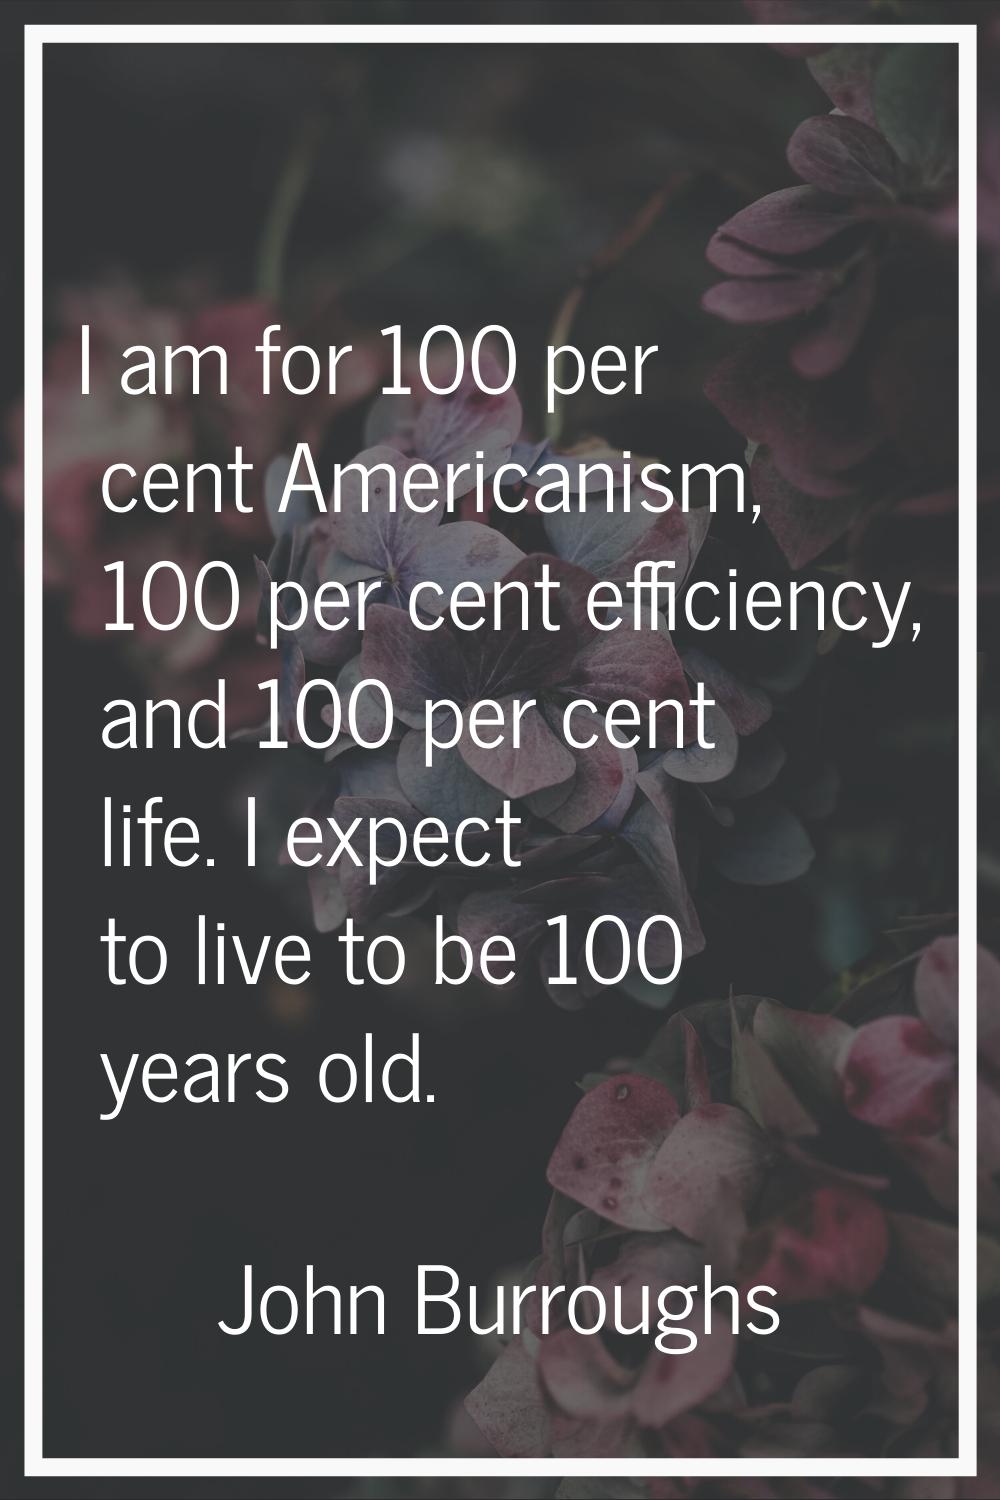 I am for 100 per cent Americanism, 100 per cent efficiency, and 100 per cent life. I expect to live